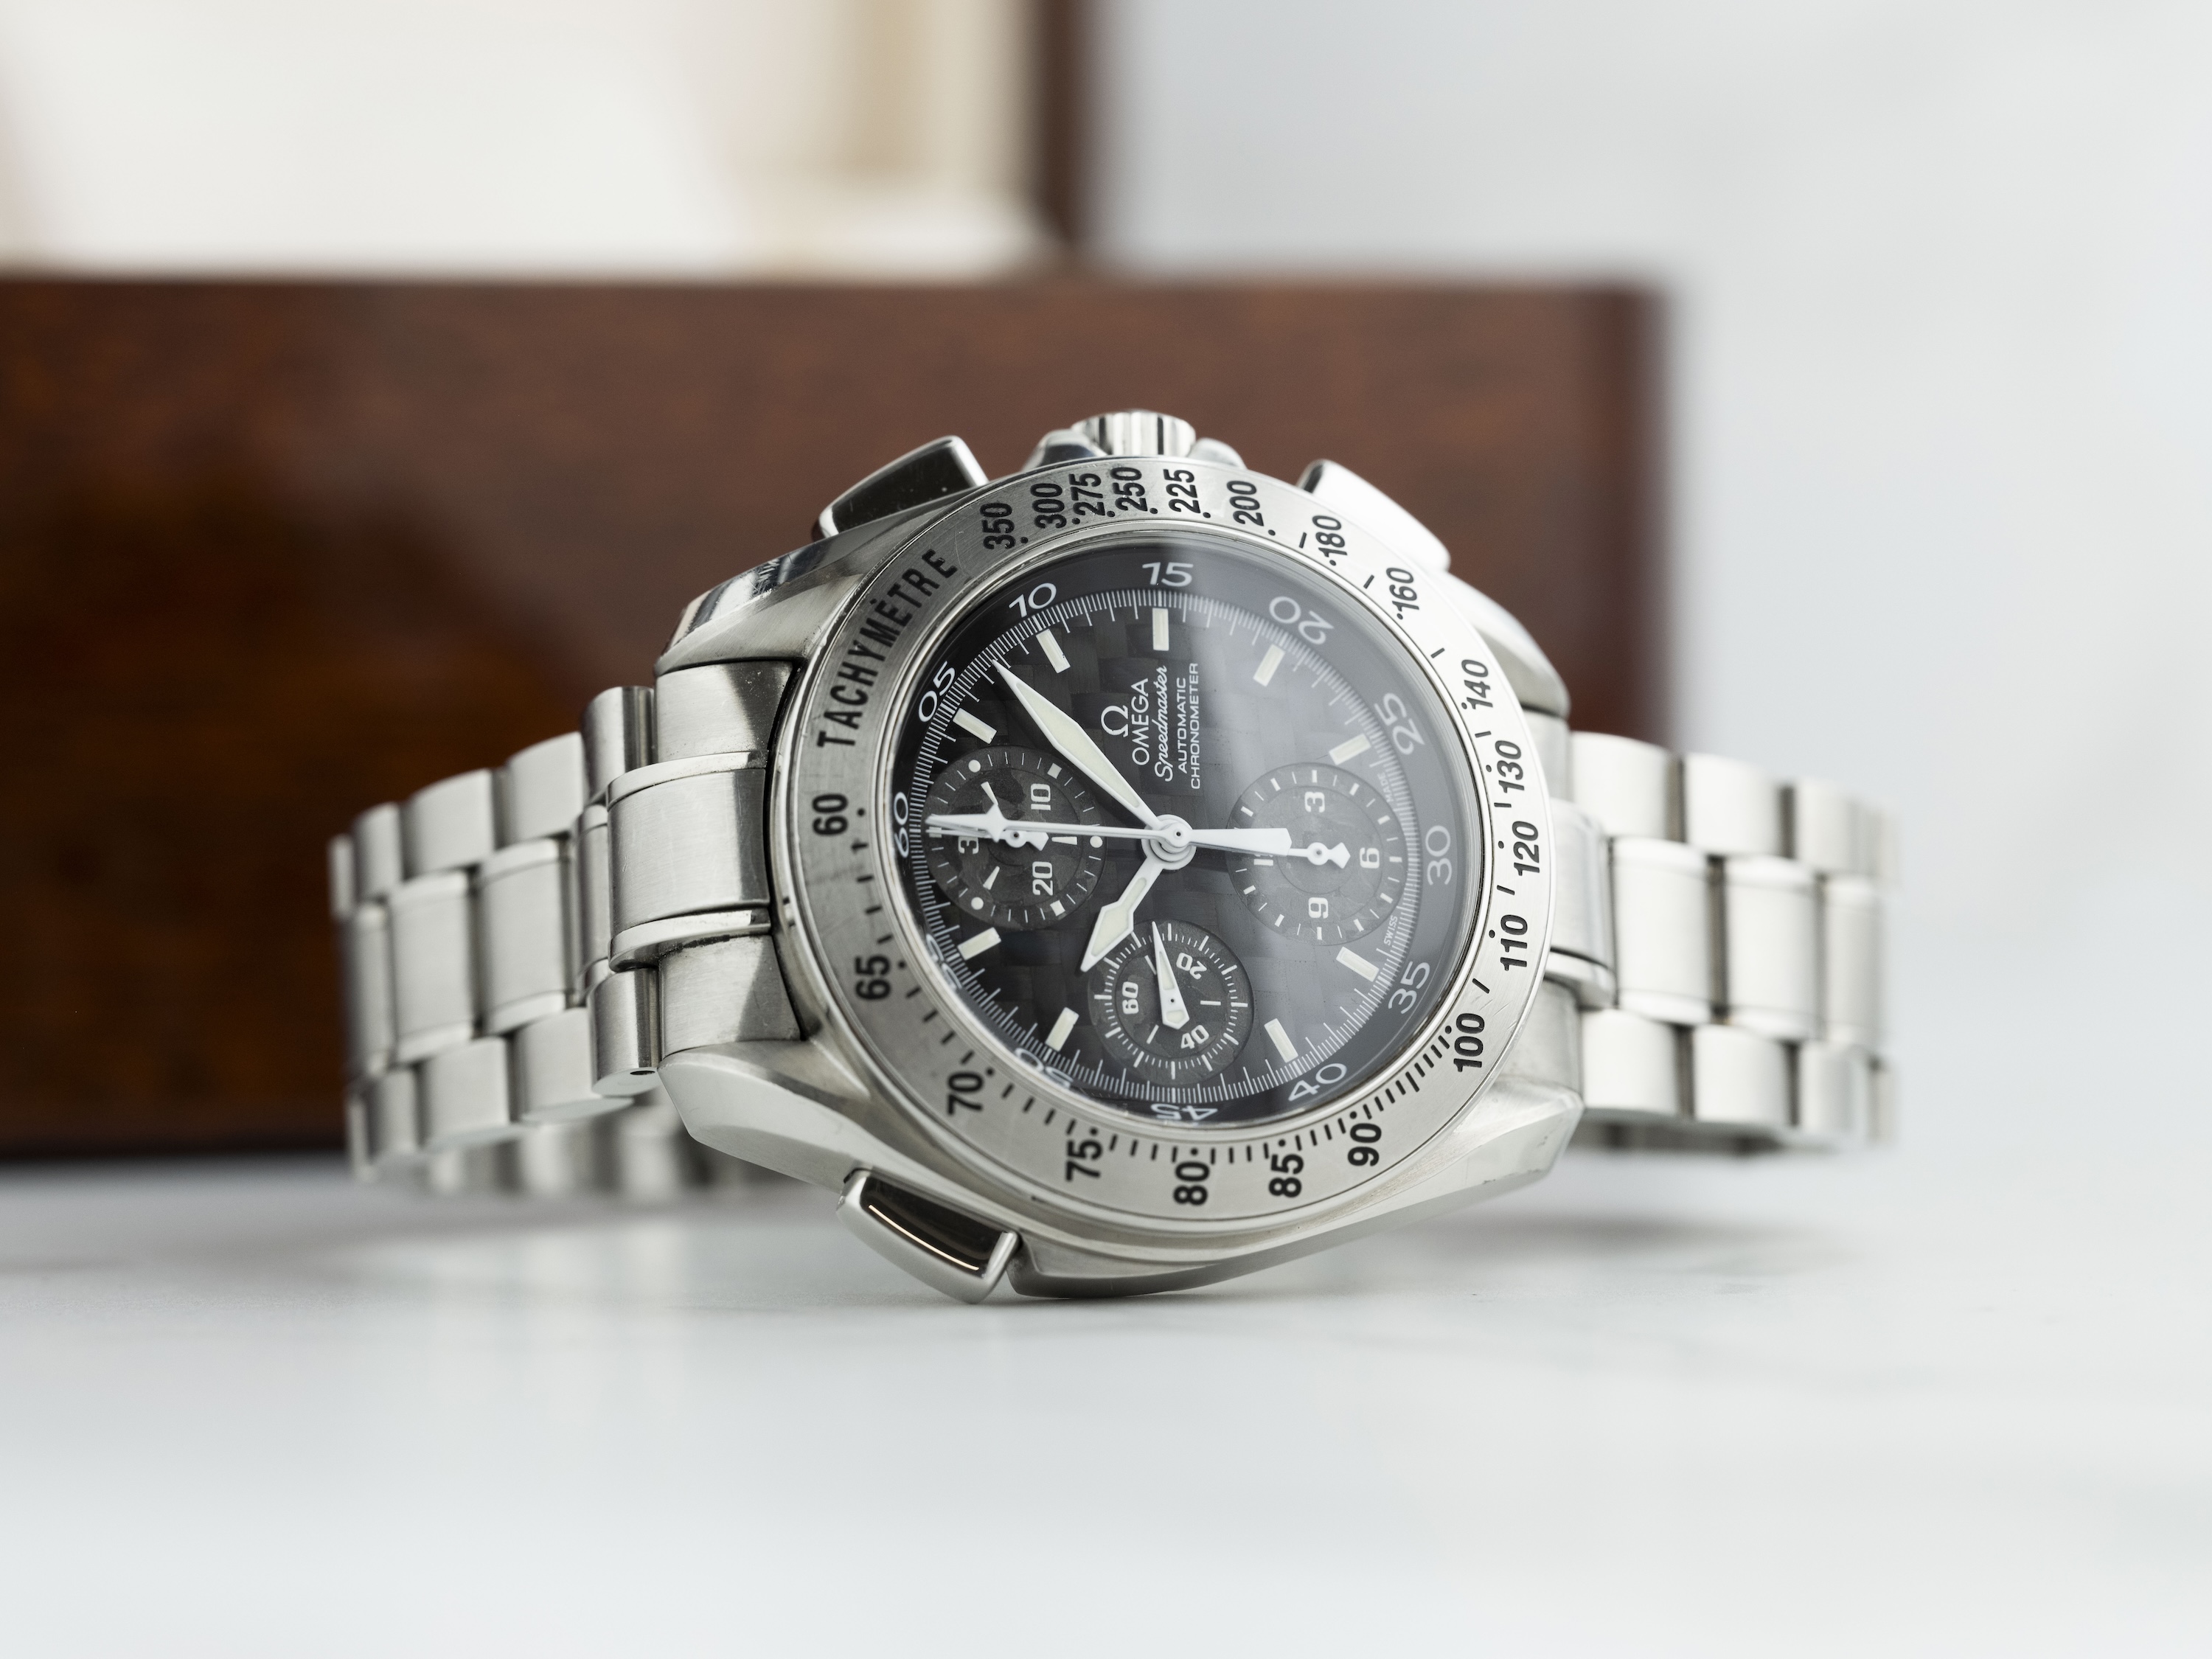 2002 Omega Speedmaster Split-Seconds for sale by auction in London